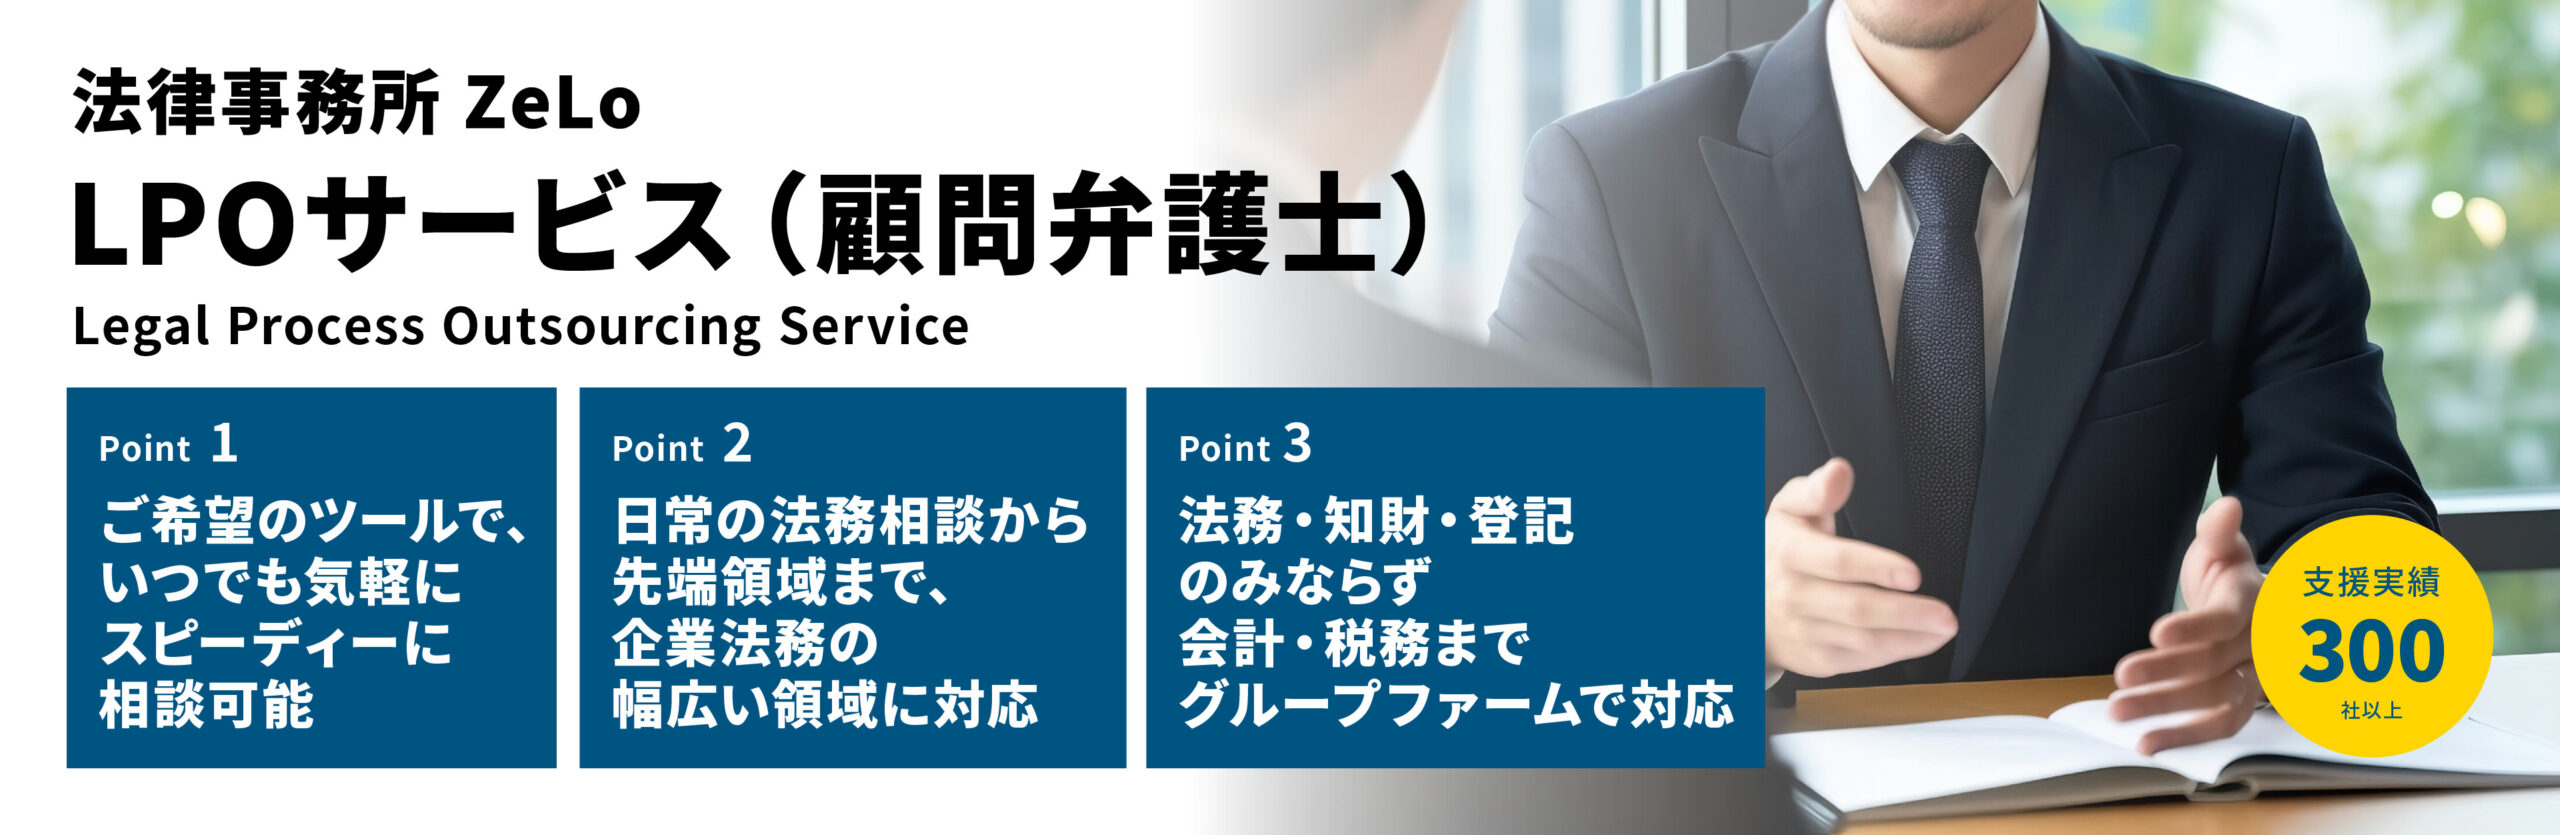 LPOサービス（顧問弁護士／Legal Process Outsourcing Service）